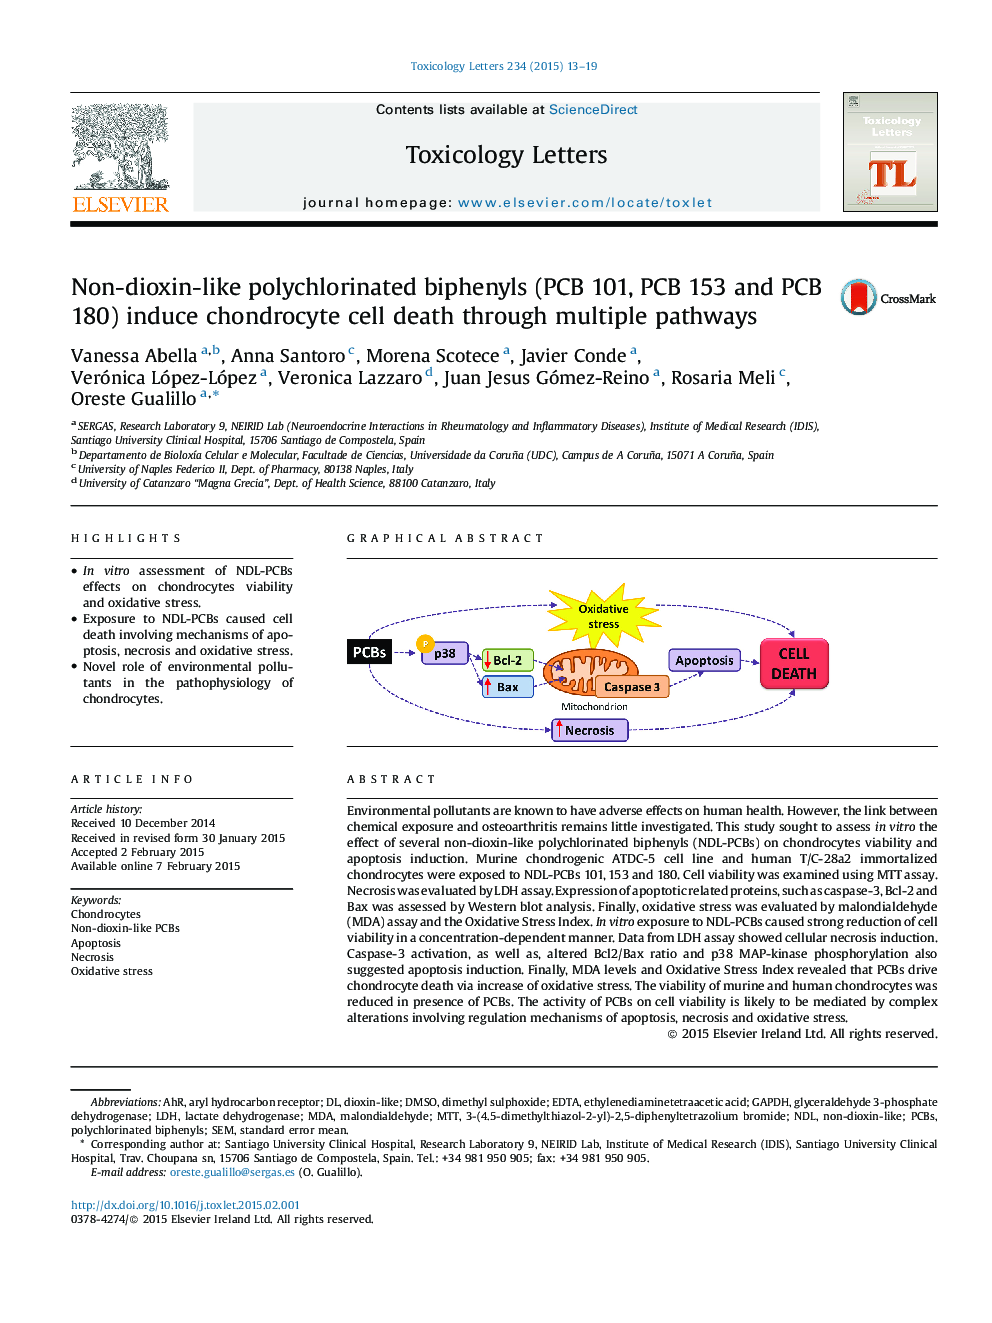 Non-dioxin-like polychlorinated biphenyls (PCB 101, PCB 153 and PCB 180) induce chondrocyte cell death through multiple pathways